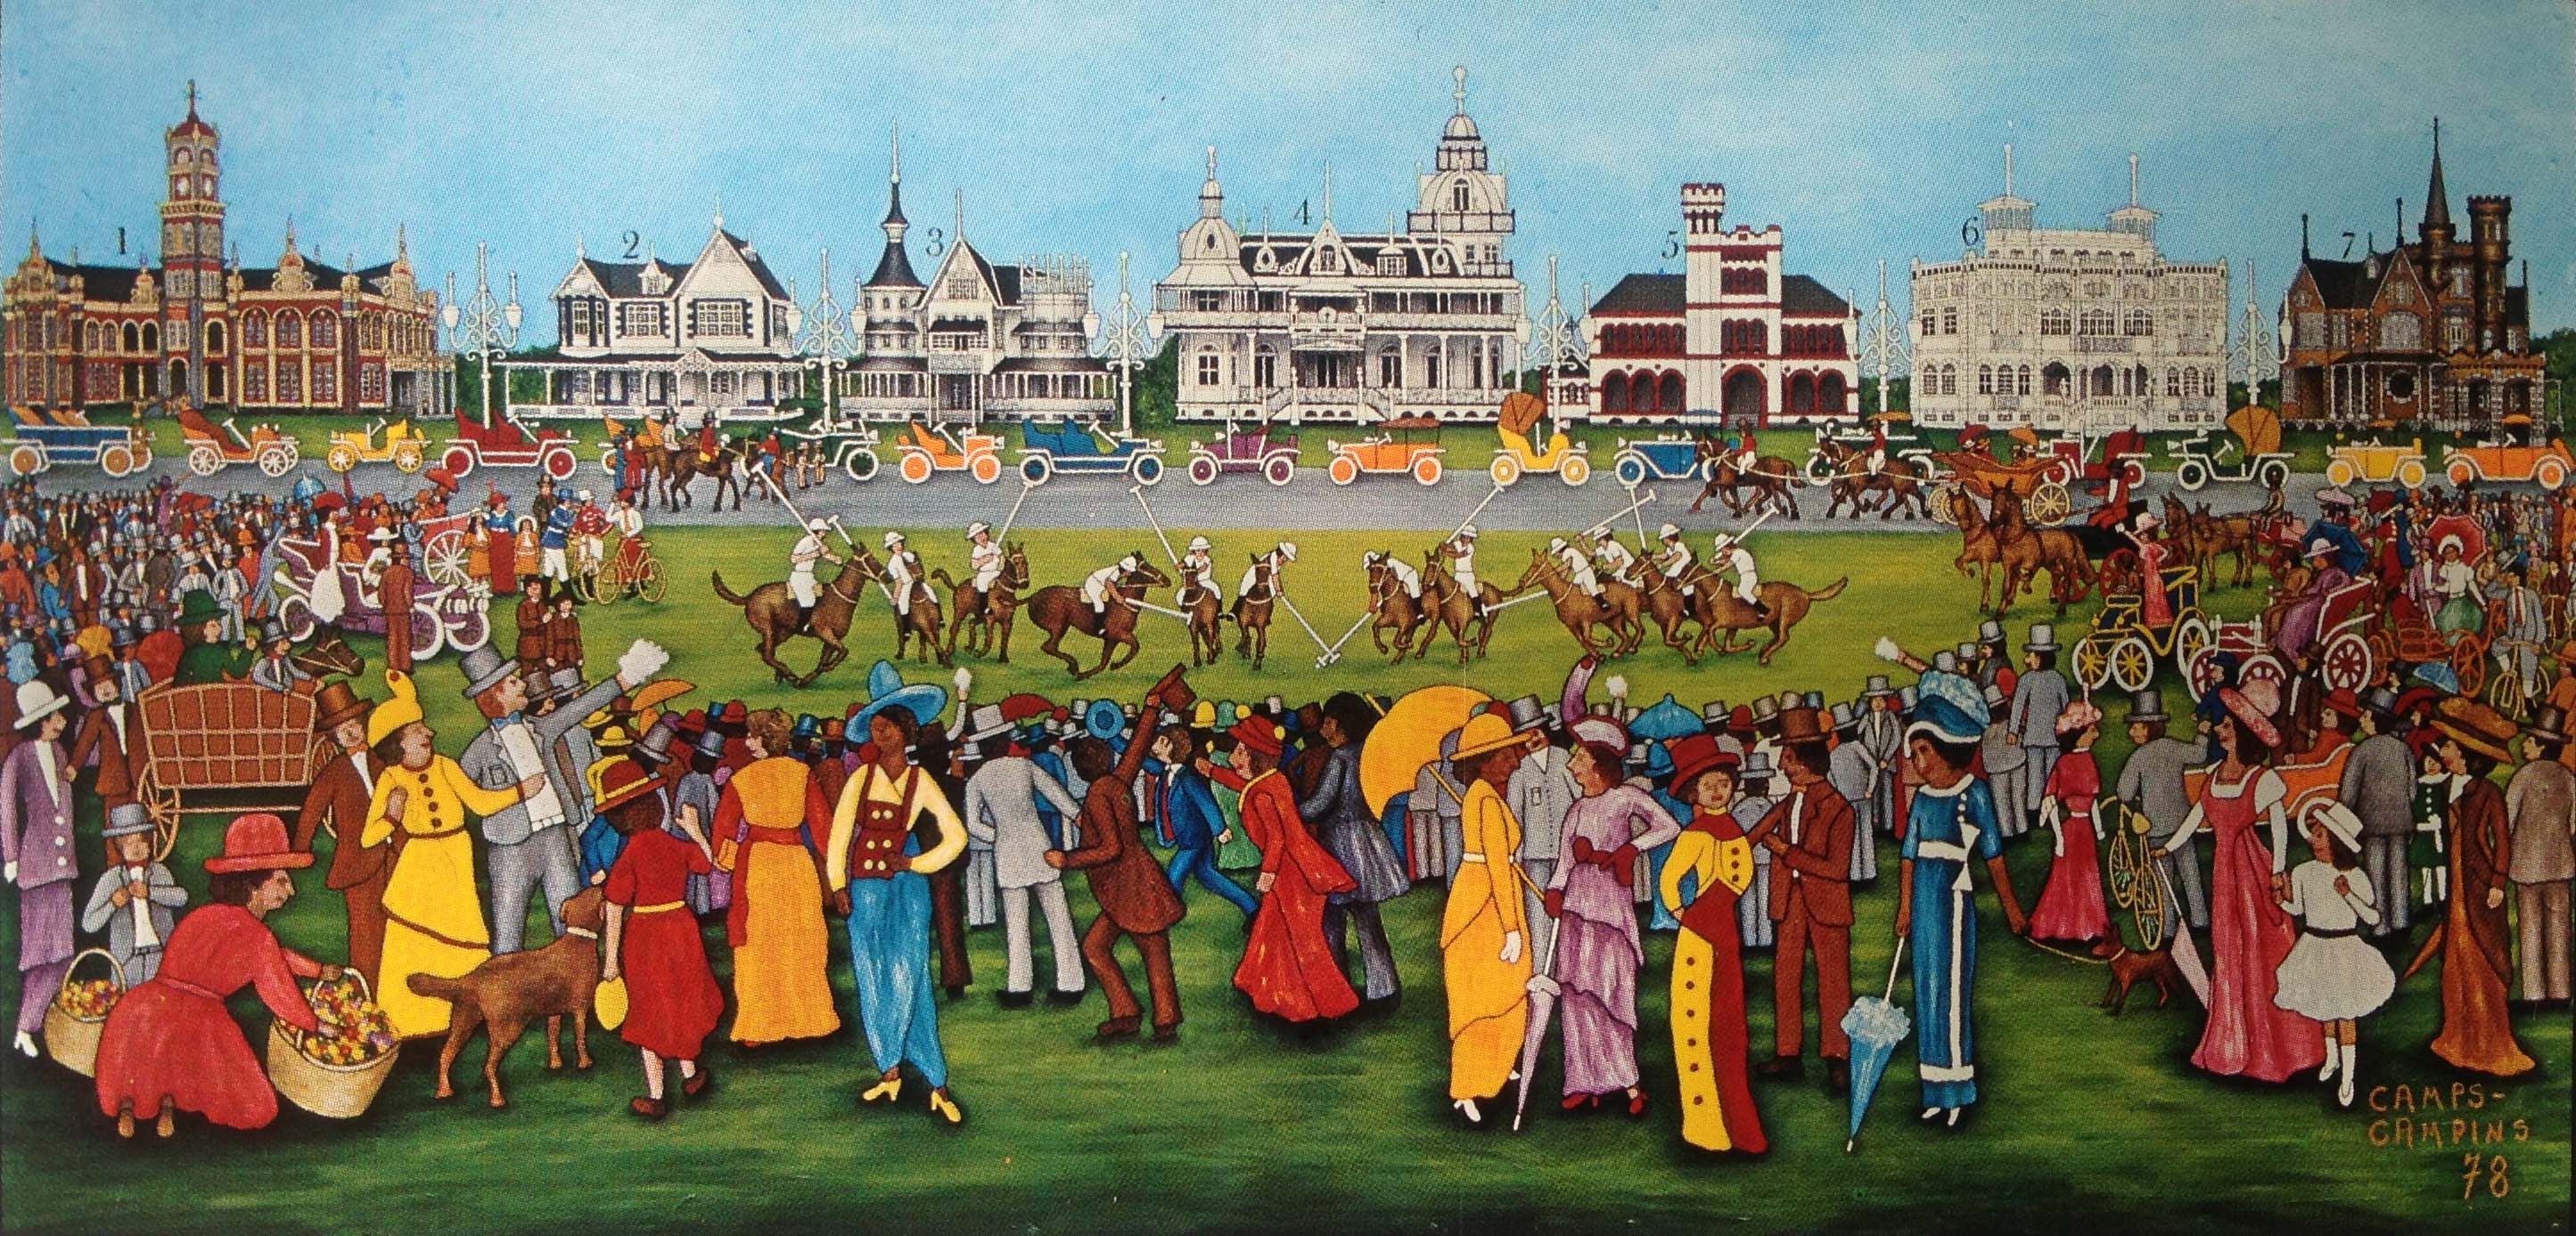 Painting of a 1910 polo match by artist, Adrian Camps-Campin, features Hayes Court in its glory along with the other Magnificent Seven Monuments.